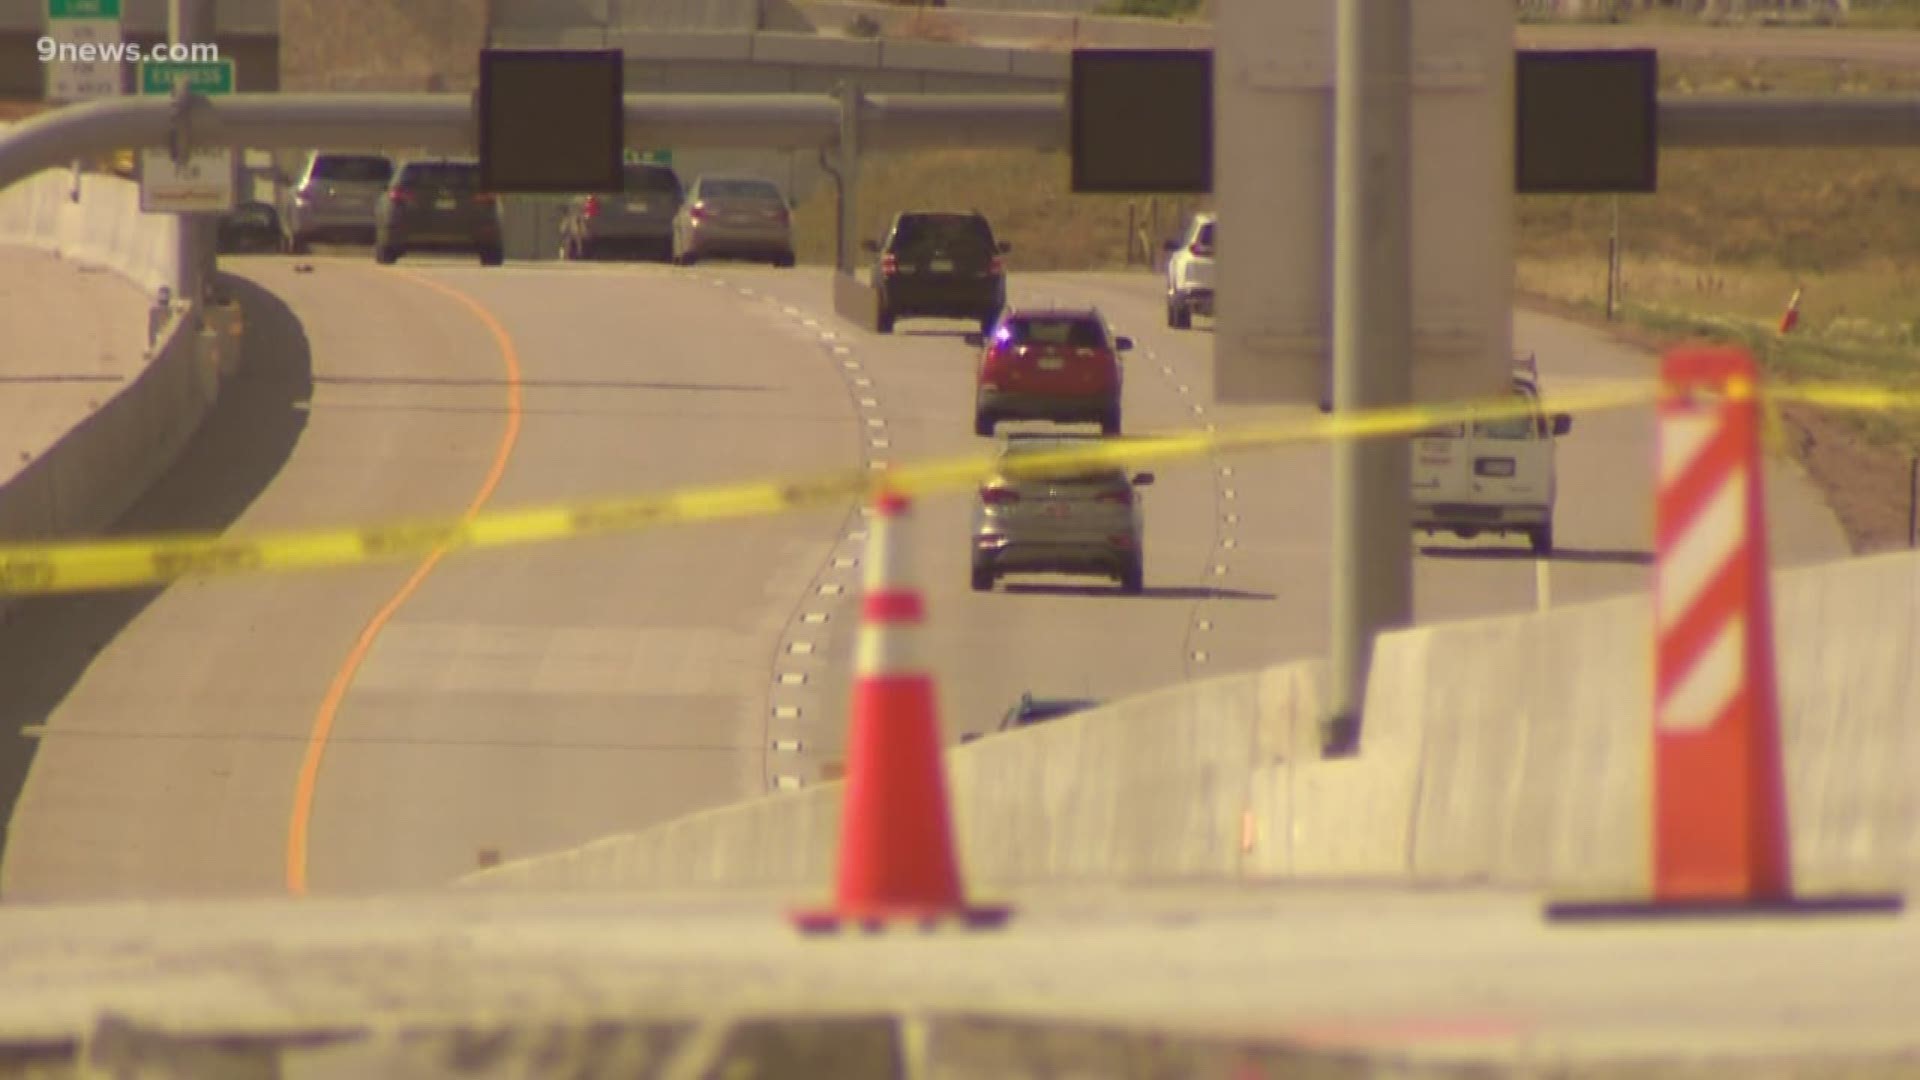 We've told you the company that profits off 36 might not pay for its repairs and that taxpayers might be on the hook for both repairs and lost toll revenue. What do the leaders on Colorado's transportation committee plan to do about that?